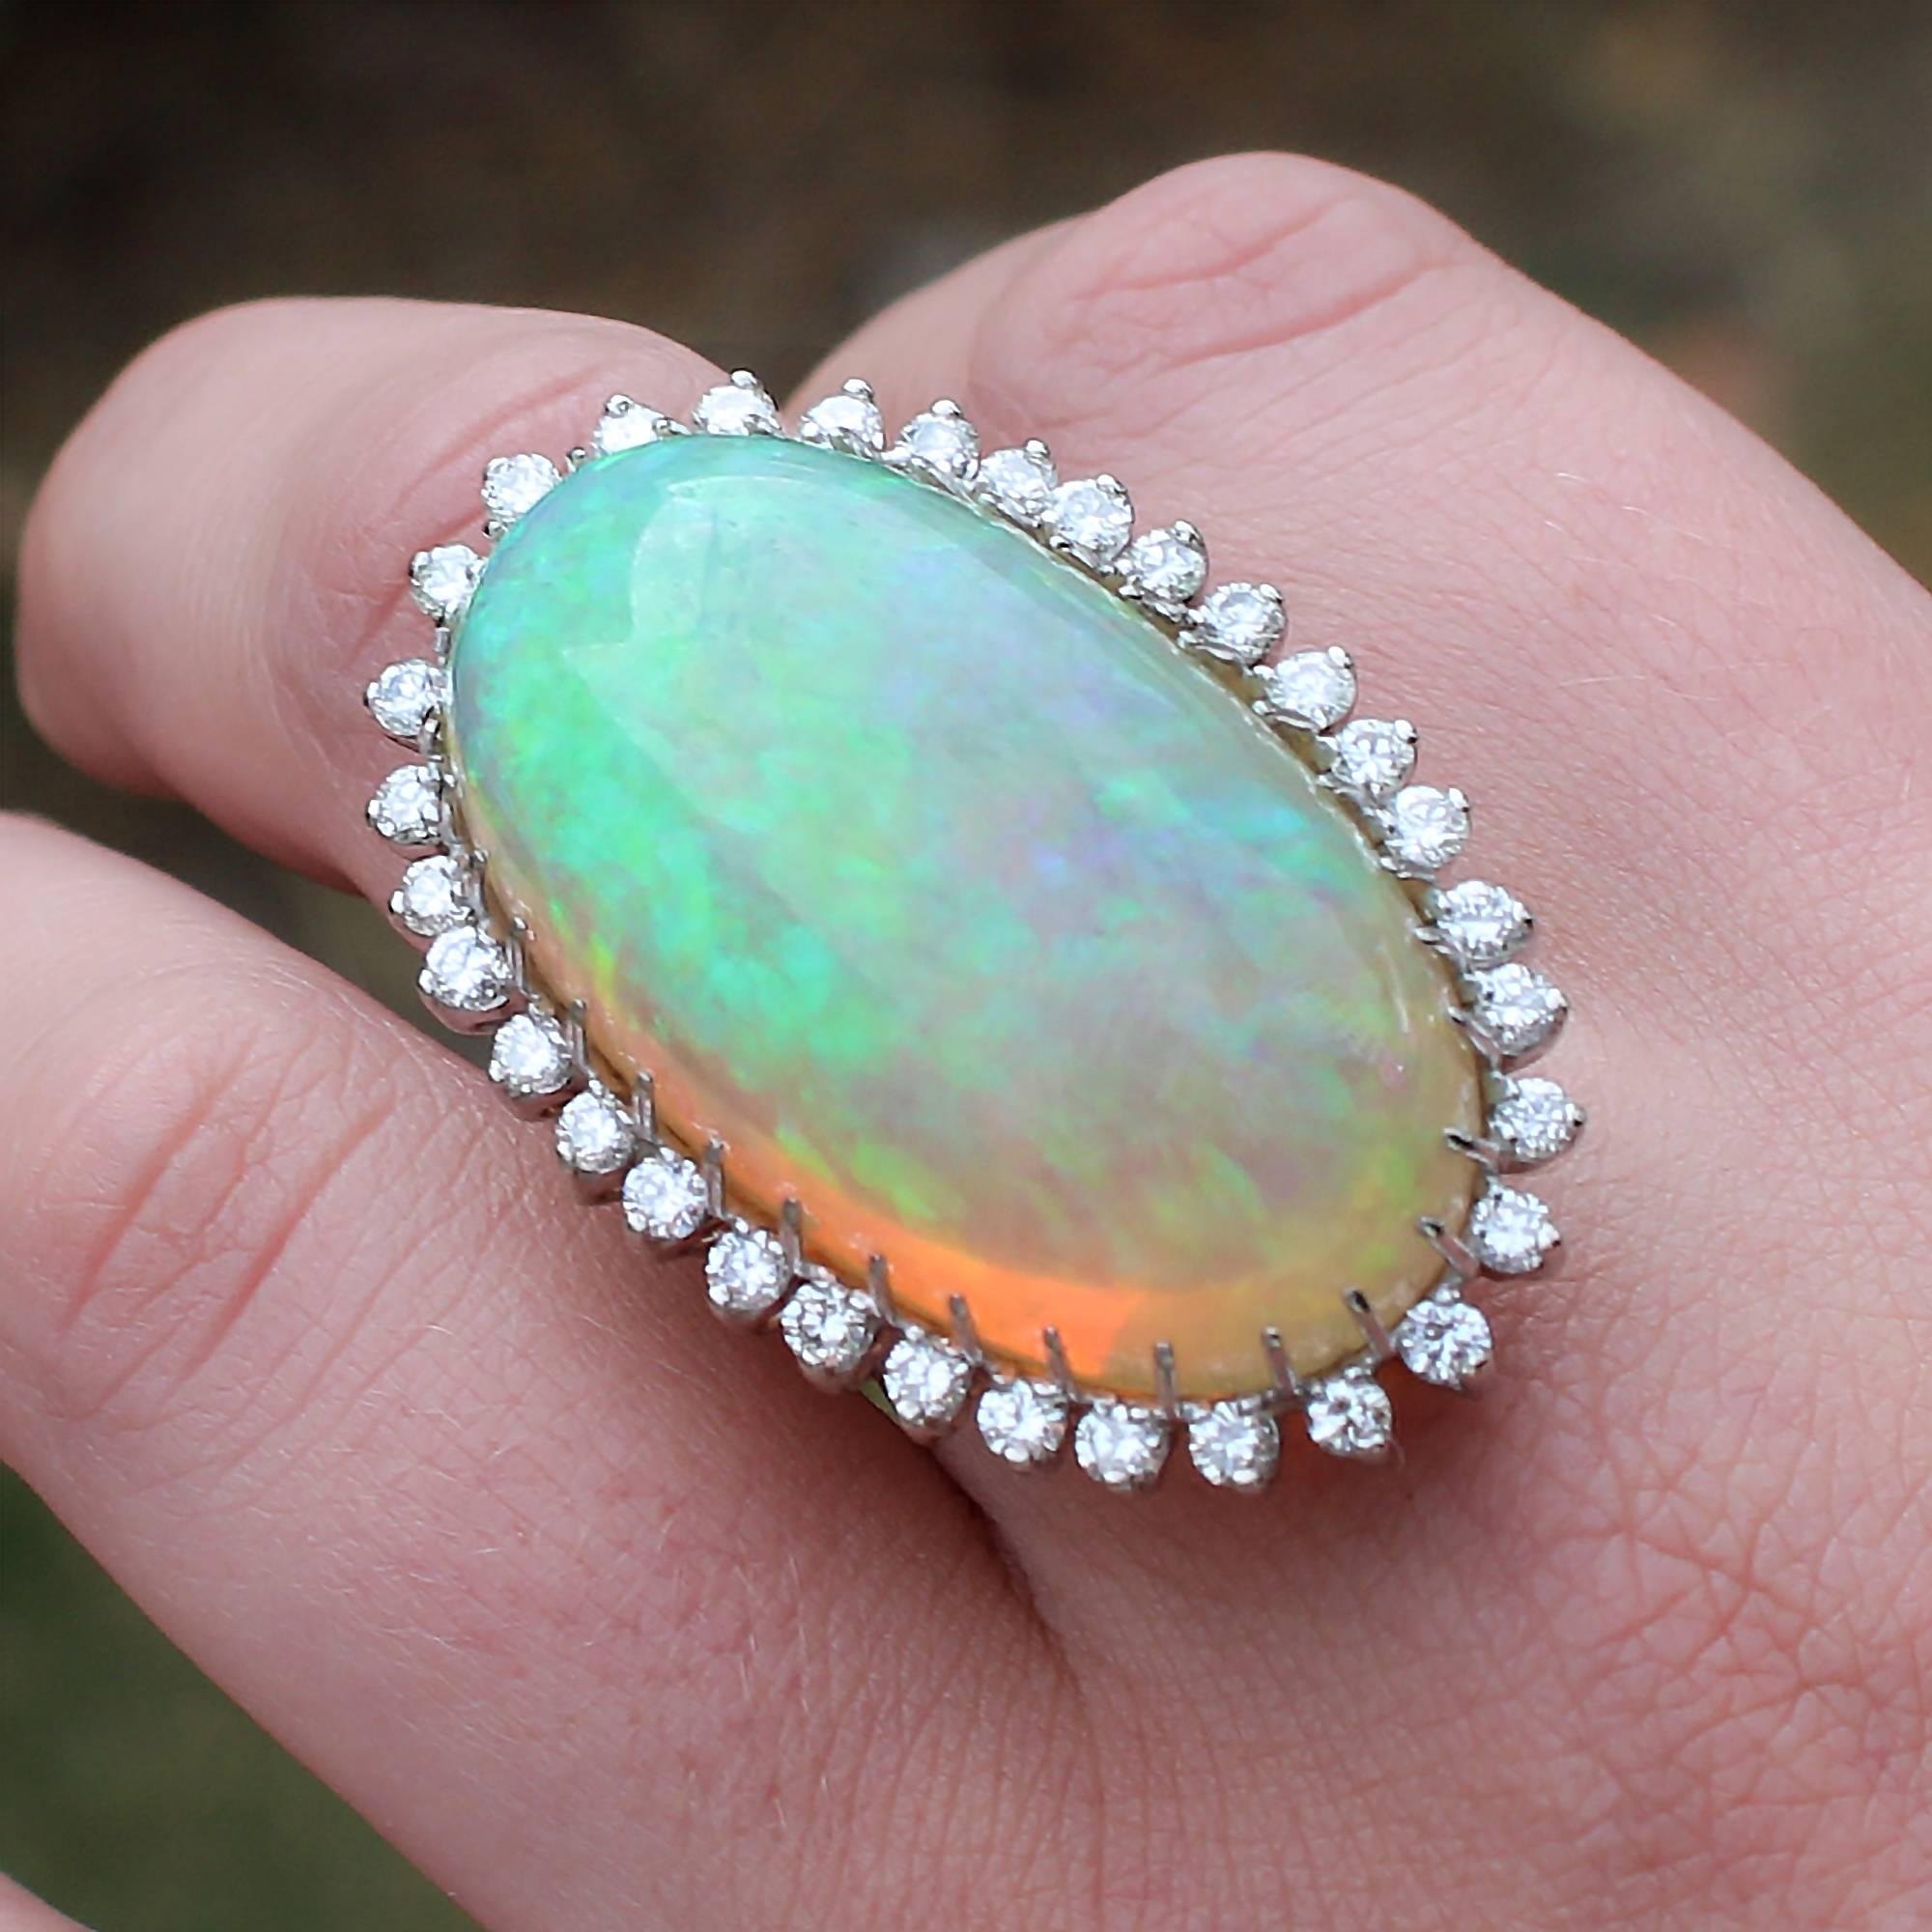 Women's 1960s-70s Modernist 47.05 Carat Cabochon Opal Ring with Diamond Halo